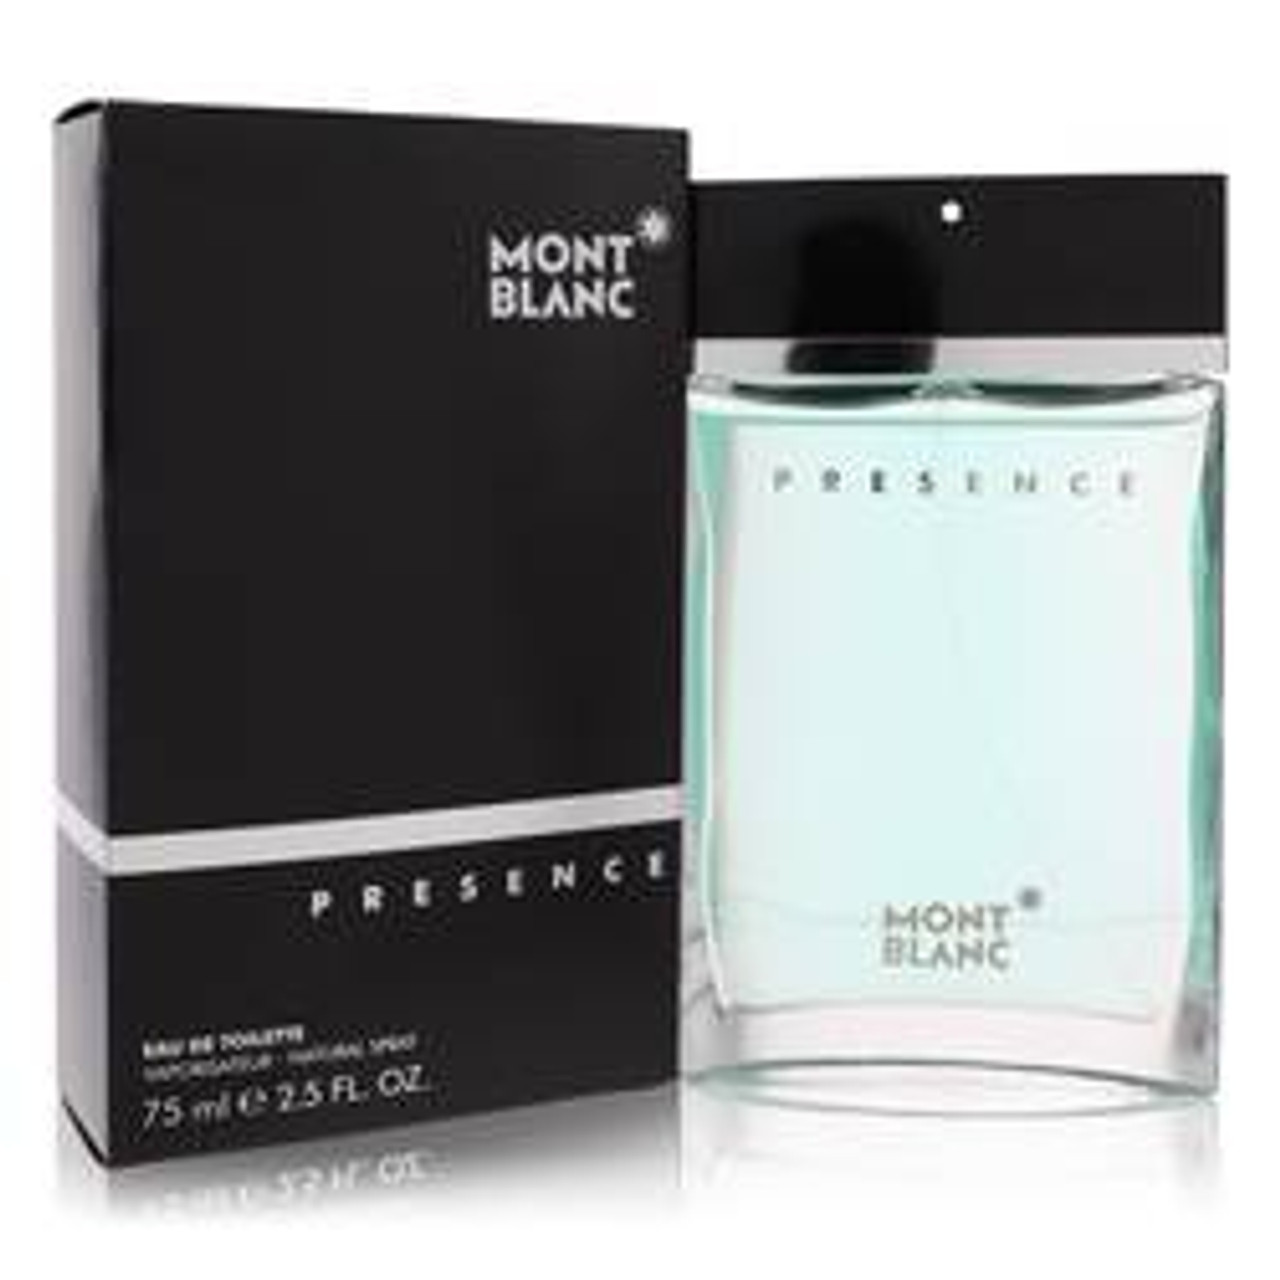 Presence Cologne By Mont Blanc Eau De Toilette Spray 2.5 oz for Men - [From 83.00 - Choose pk Qty ] - *Ships from Miami